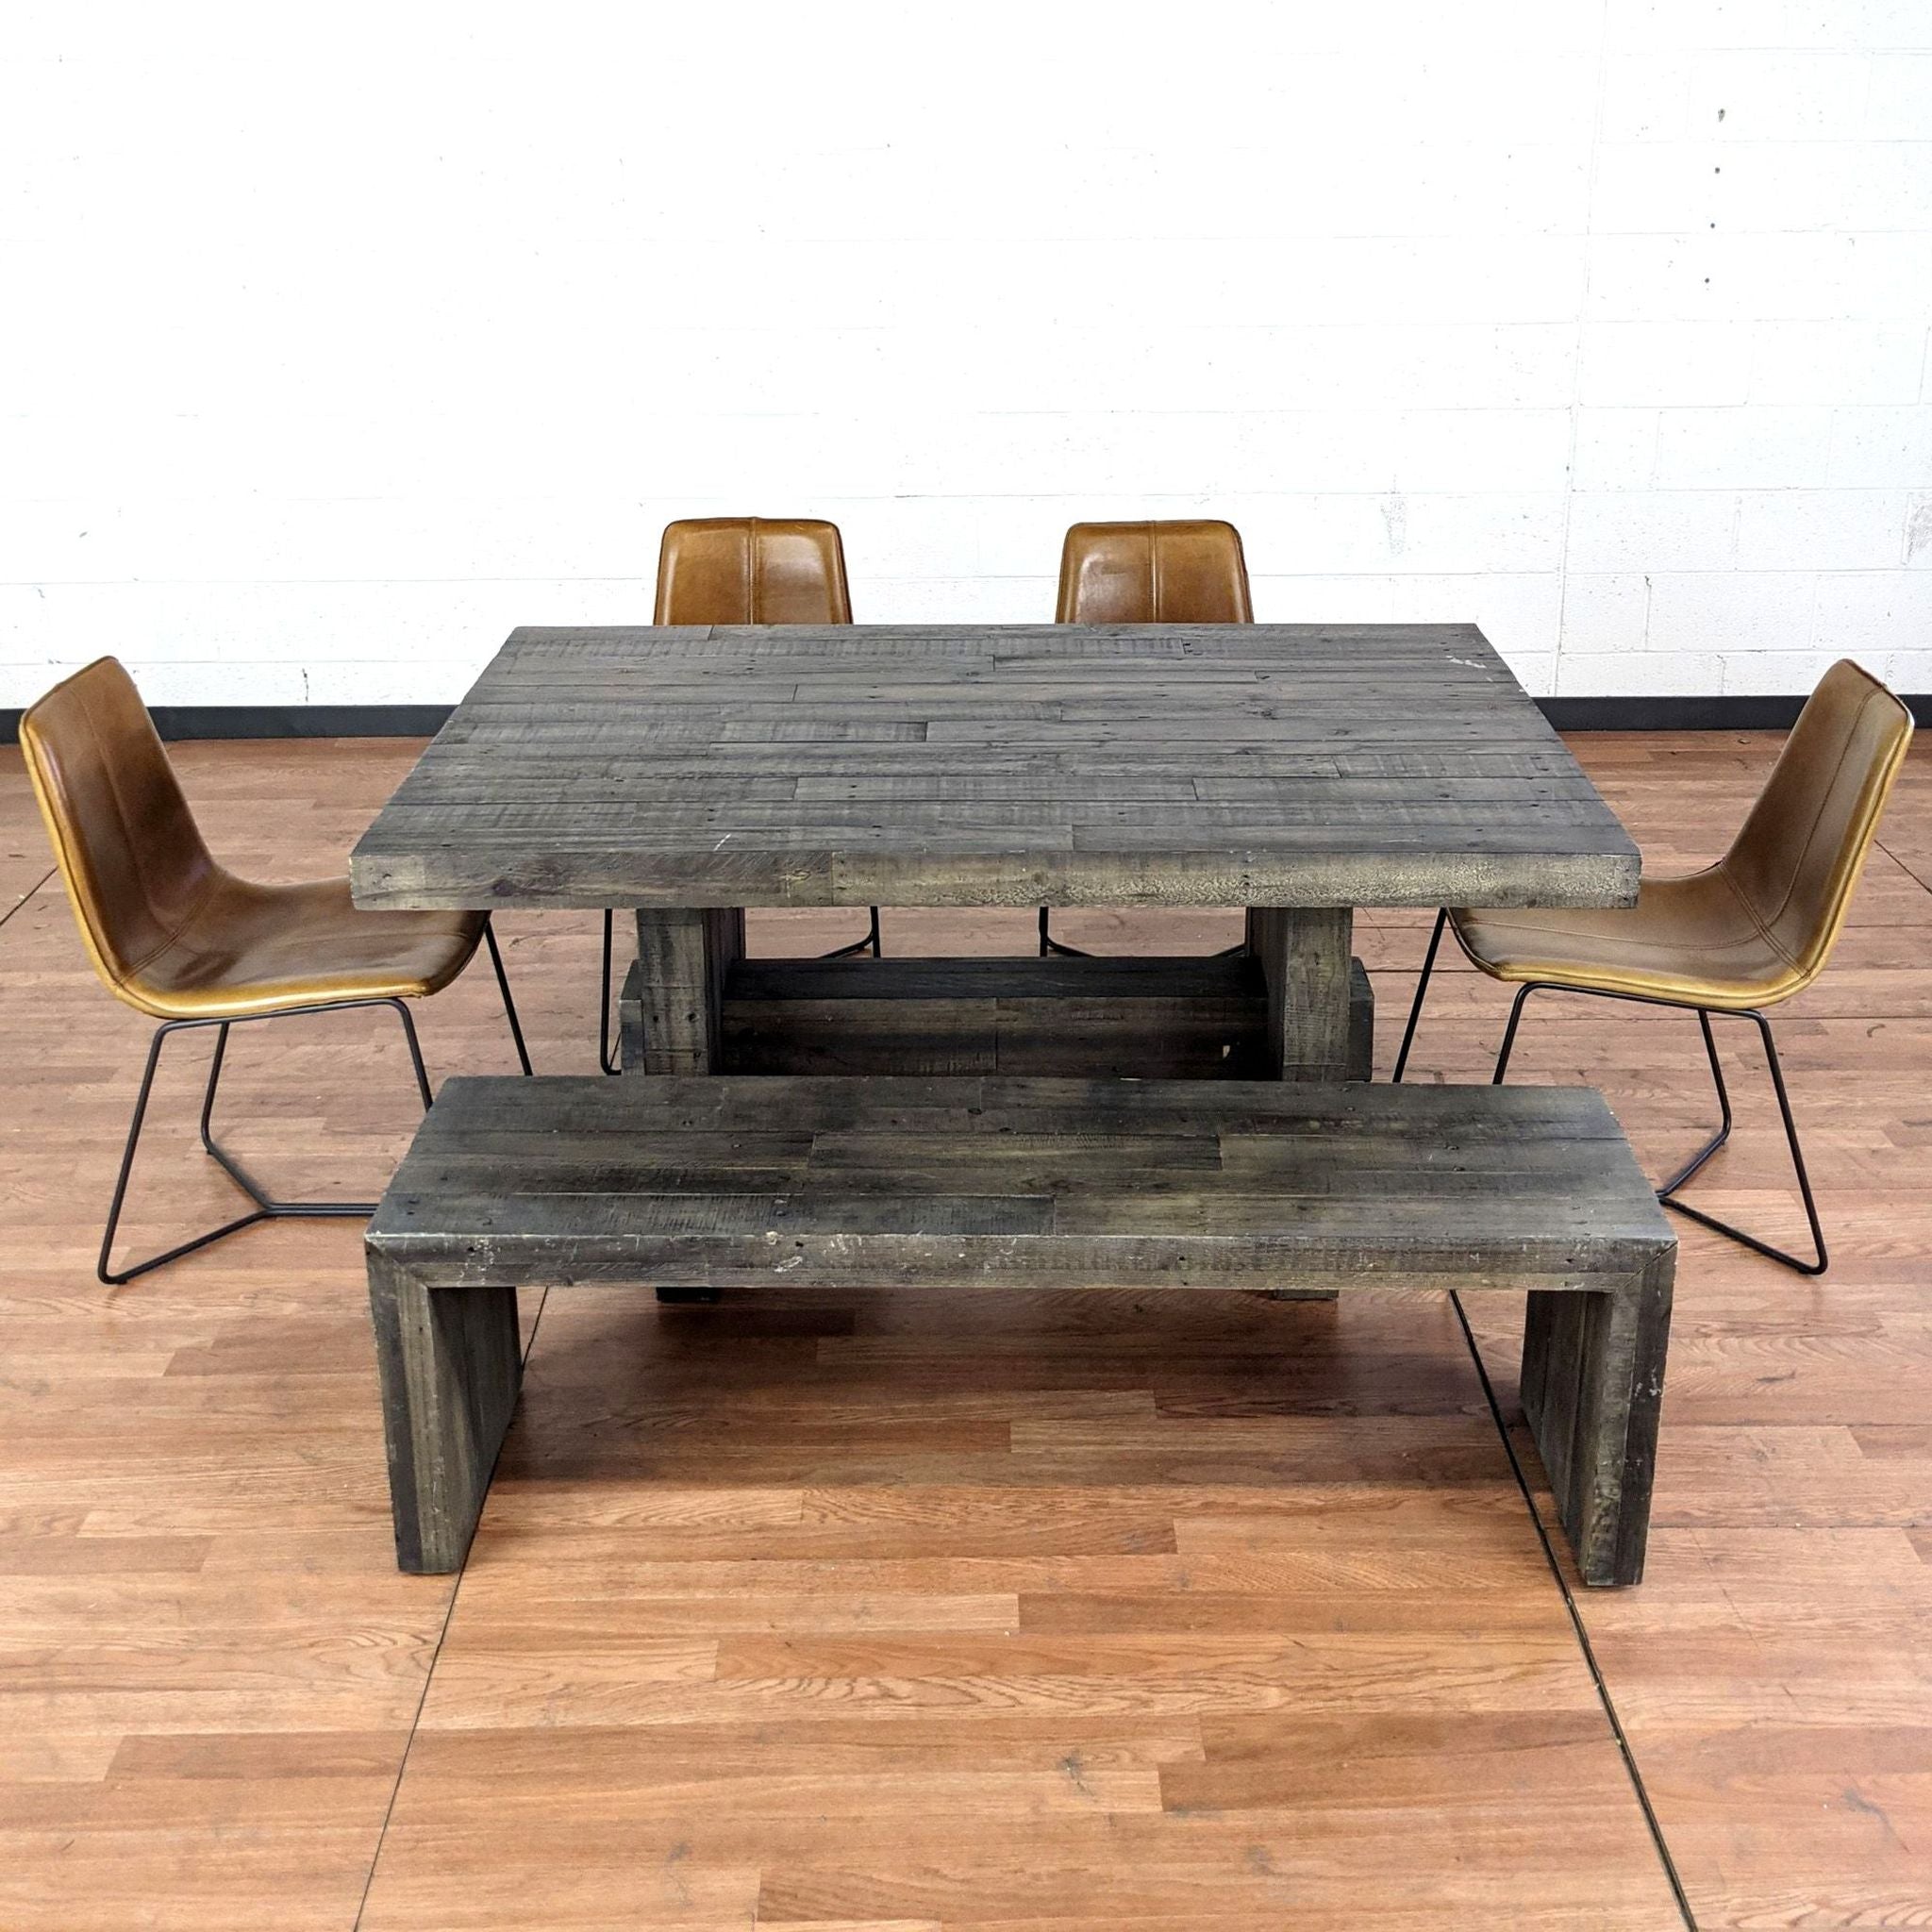 West Elm Emmerson Reclaimed Wood Dining Table And Bench With Slope Lea The Local Flea Phoenix